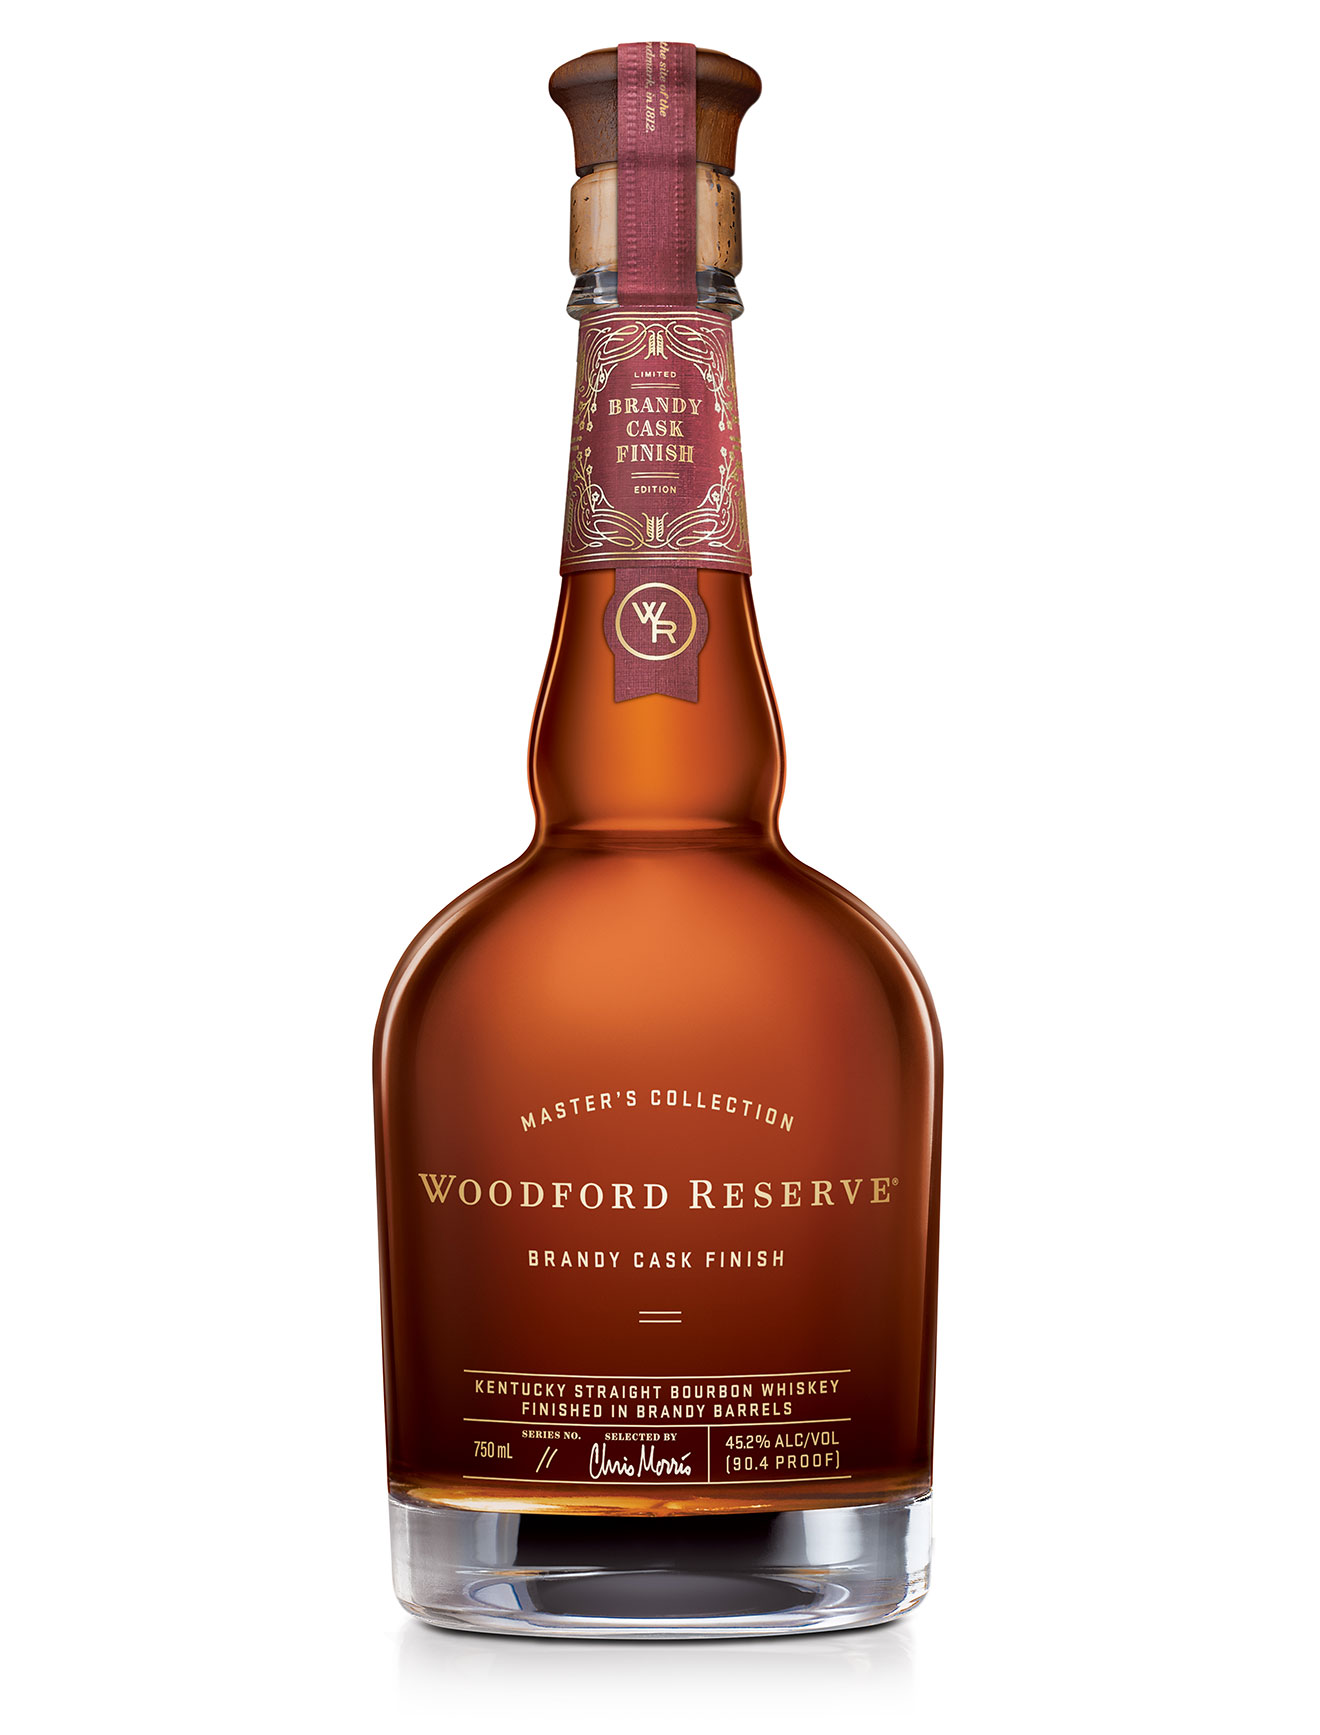 Woodford Reserve Master's Collection Brandy Cask Finish Kentucky